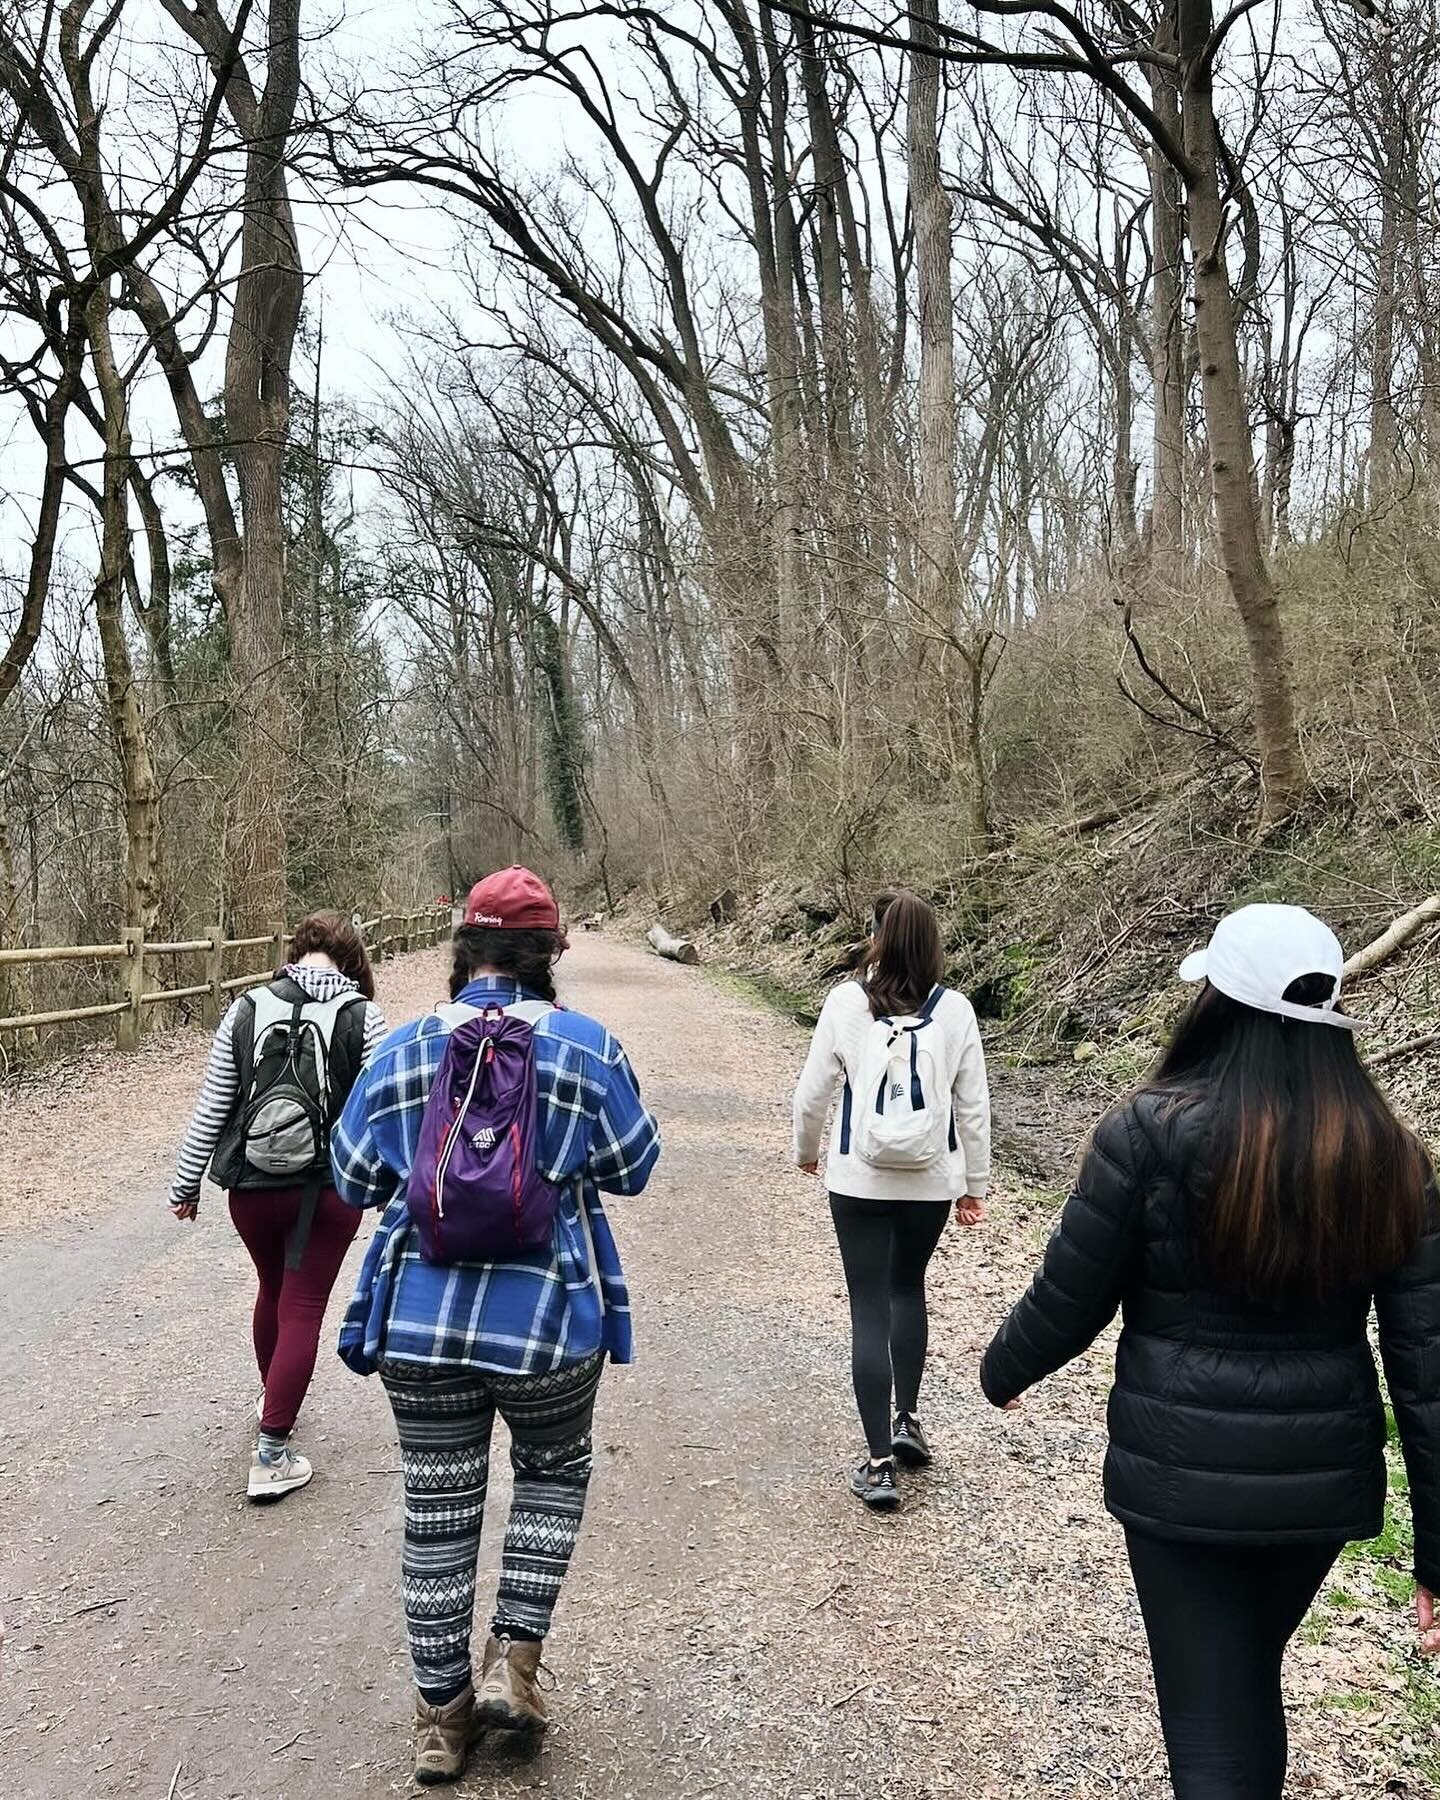 Celebrated the Lunar New Year and first day of spring hiking the Wissahickon with an amazing group of people! 🌝🐉 

It was so lovely sharing the mild temps and beautiful scenery with you! 🌳🍂✨

📅 Mark your Calendars&mdash; next community hike is M